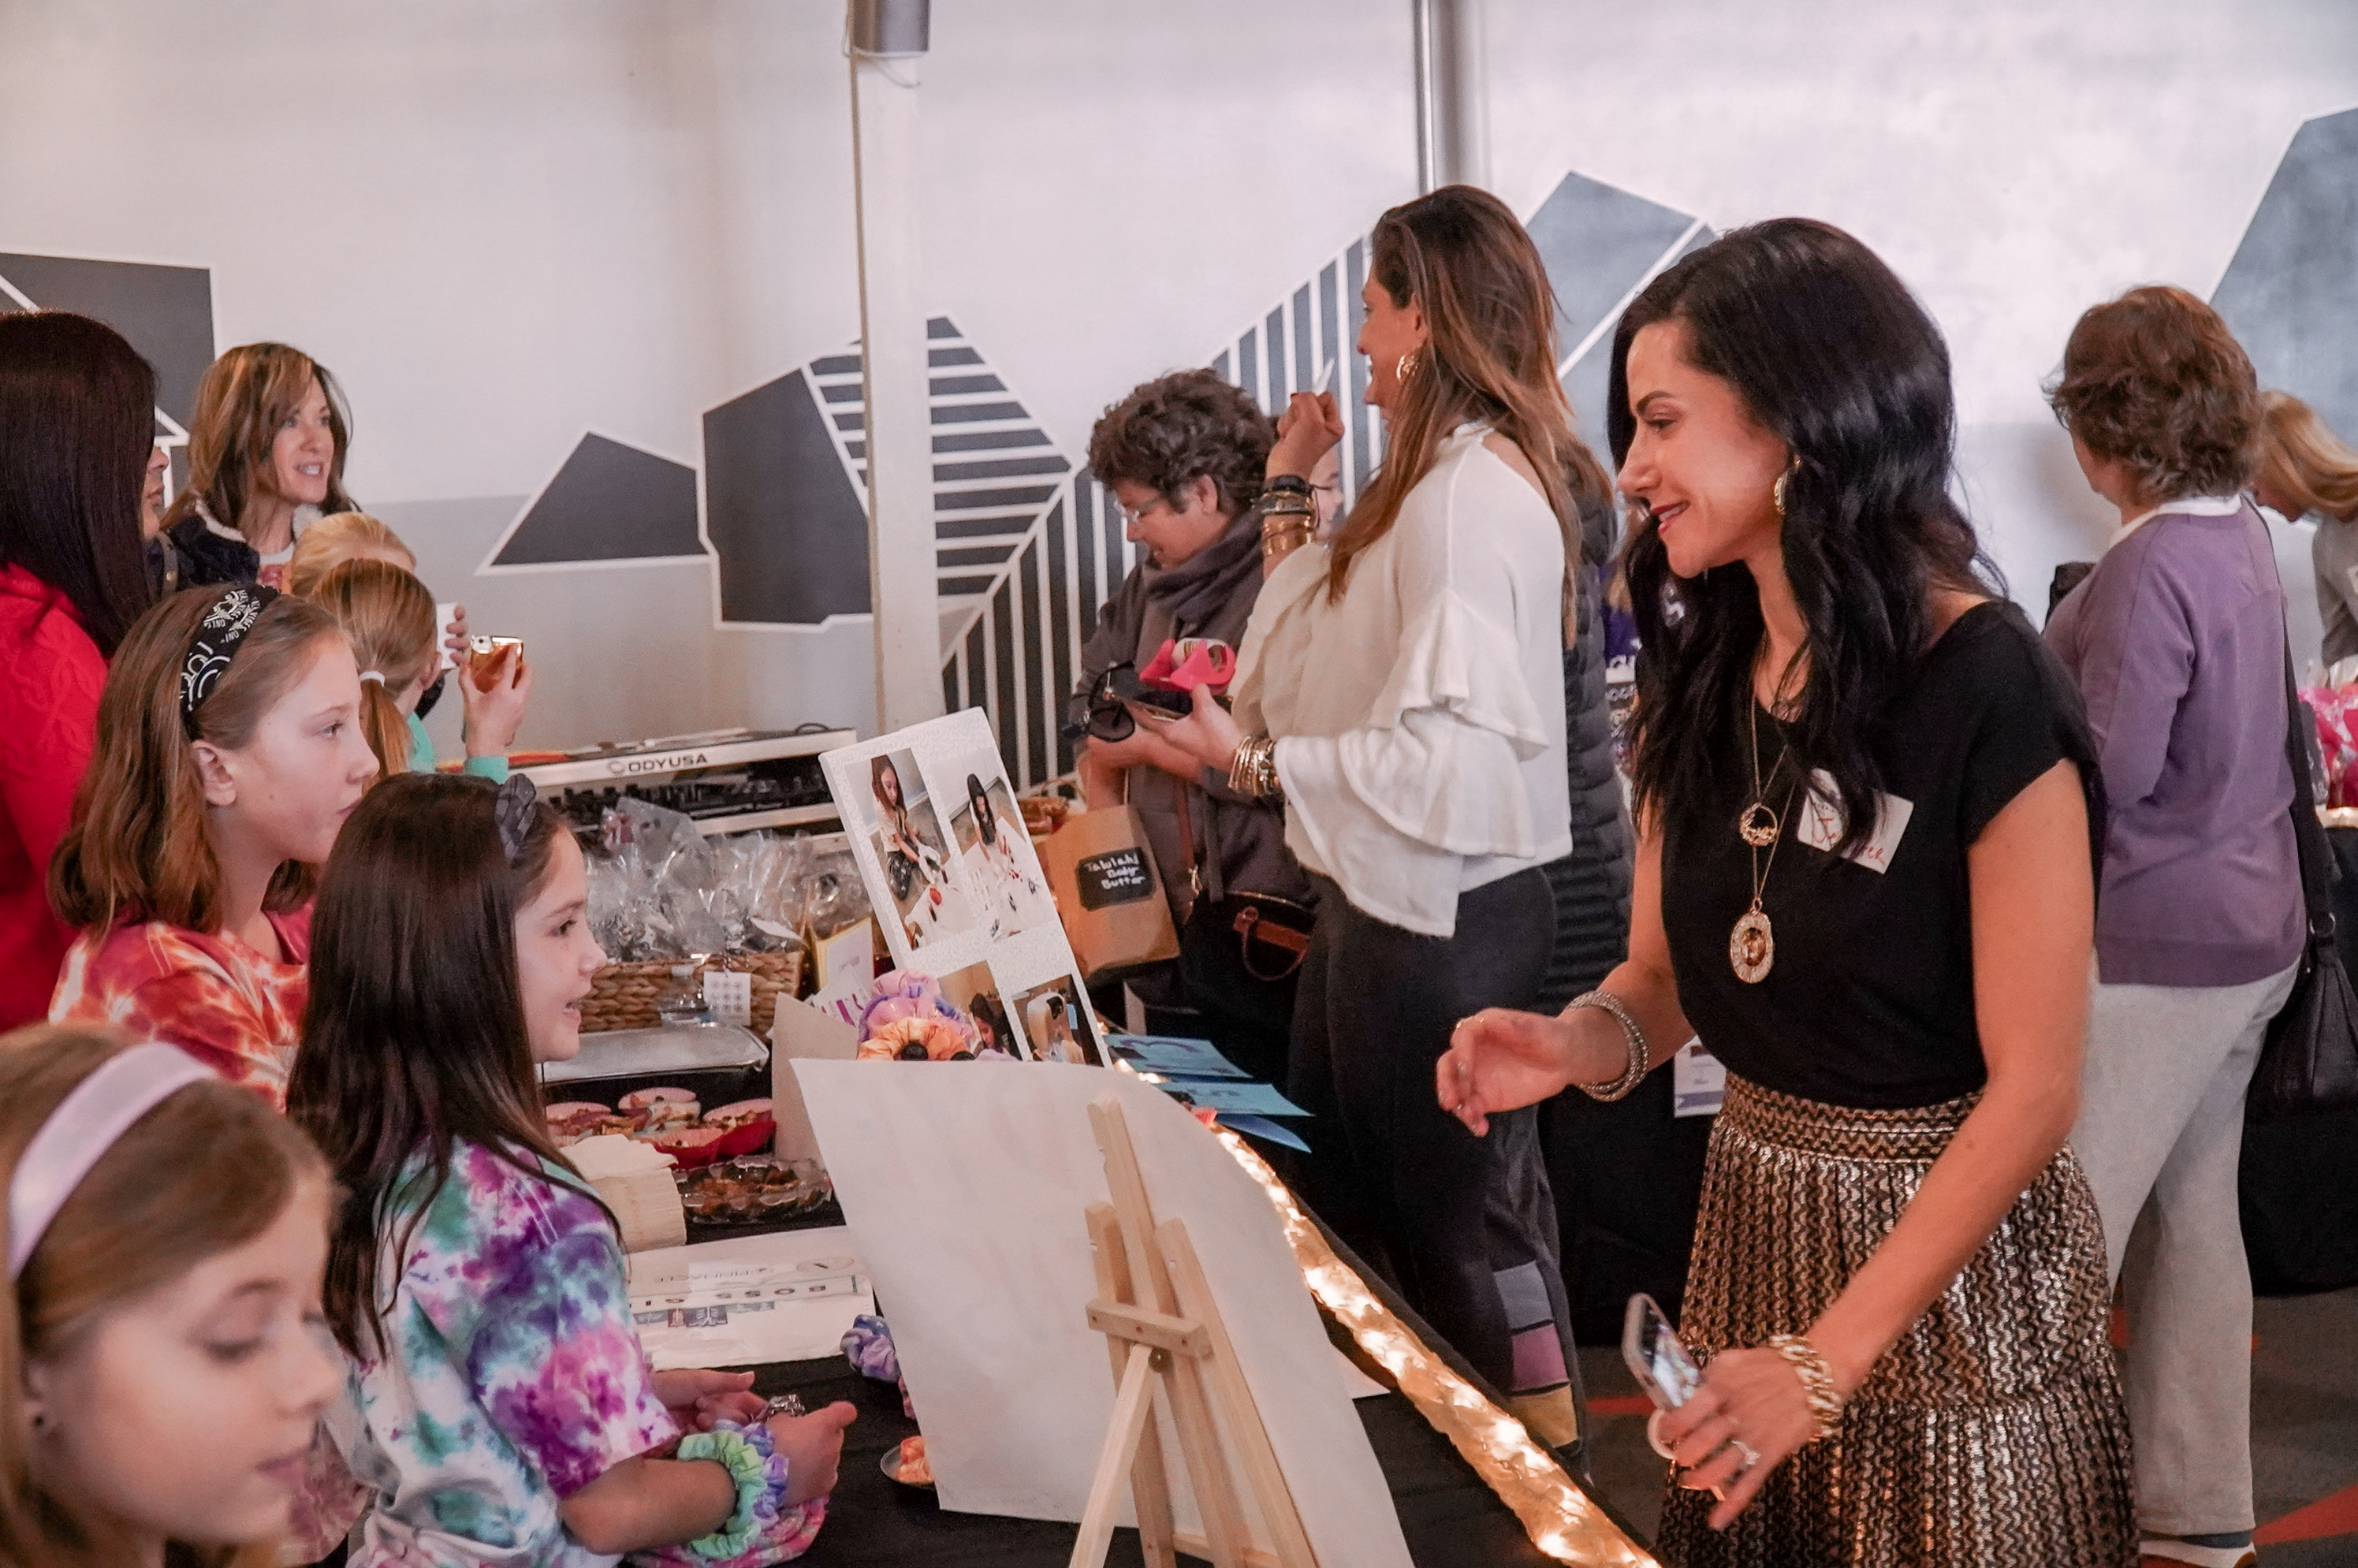 Treppie shop owners are young girls. This picture shows them standing at tables selling their work to Treppie founder Jennifer Andrews.